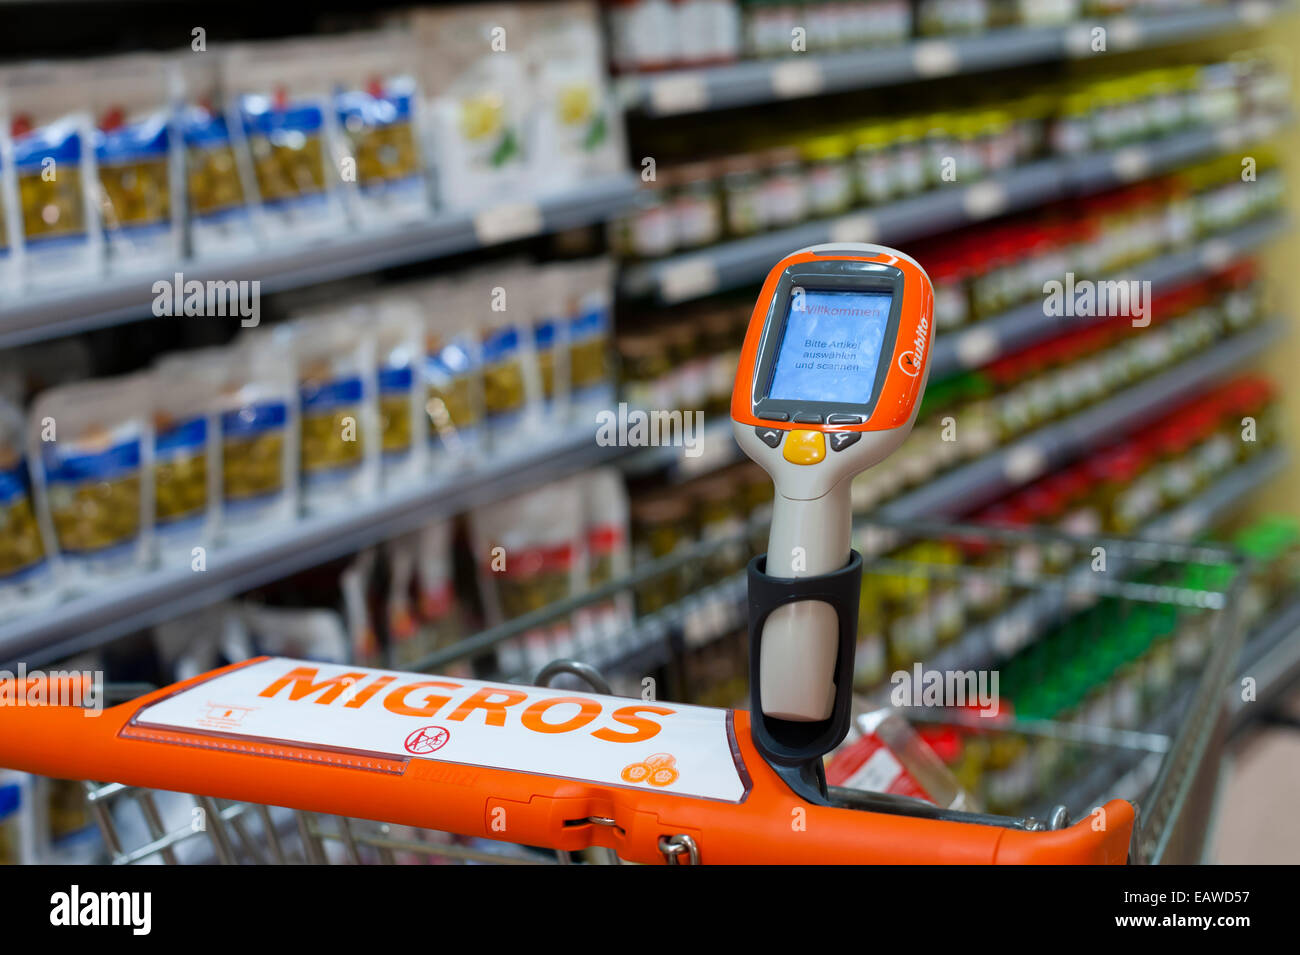 A handheld Subito self-scanning device fixed to a shopping cart in a Migros  supermarket in Zurich, Switzerland Stock Photo - Alamy